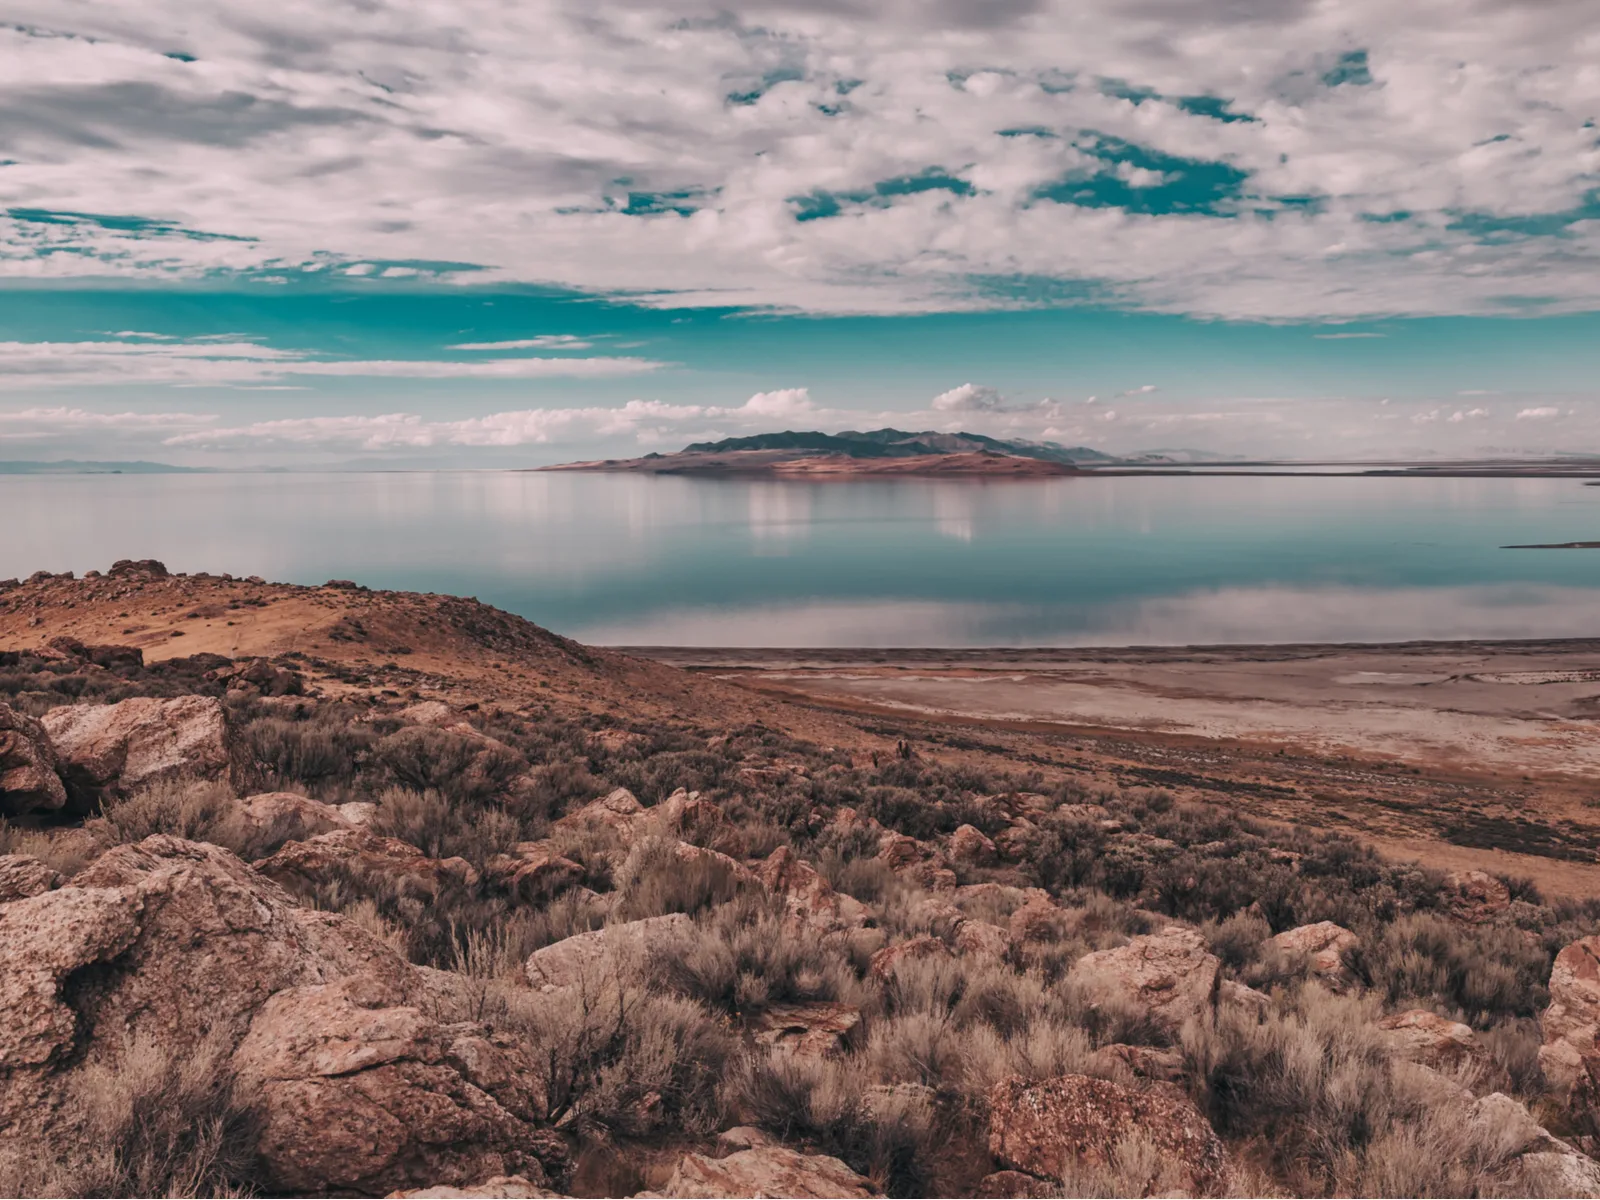 Image of the Great Salt Lake, one of the best places to visit in Utah, as seen from the shore